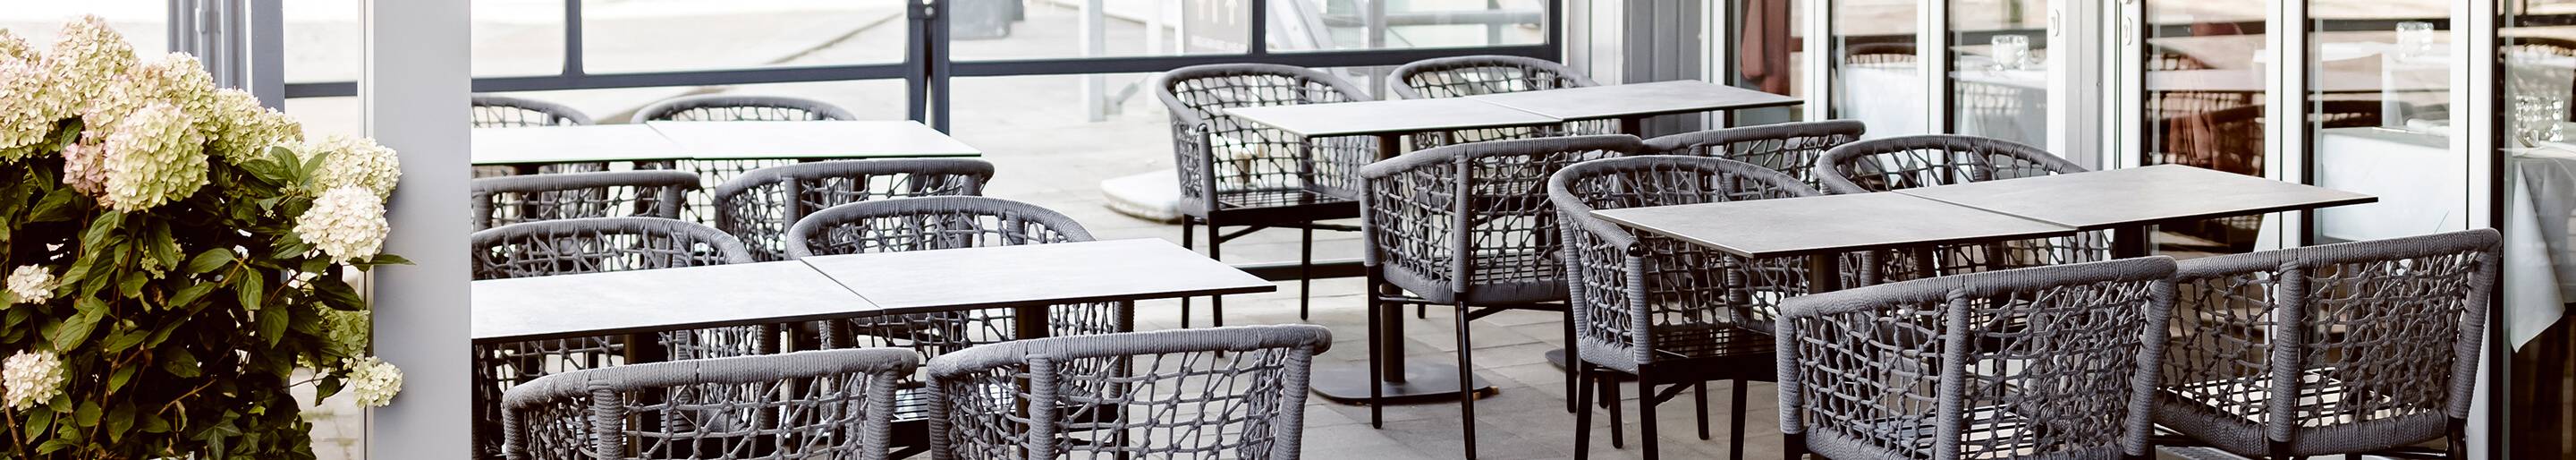 Outdoor Wickerwork chairs for your restaurant or hotel